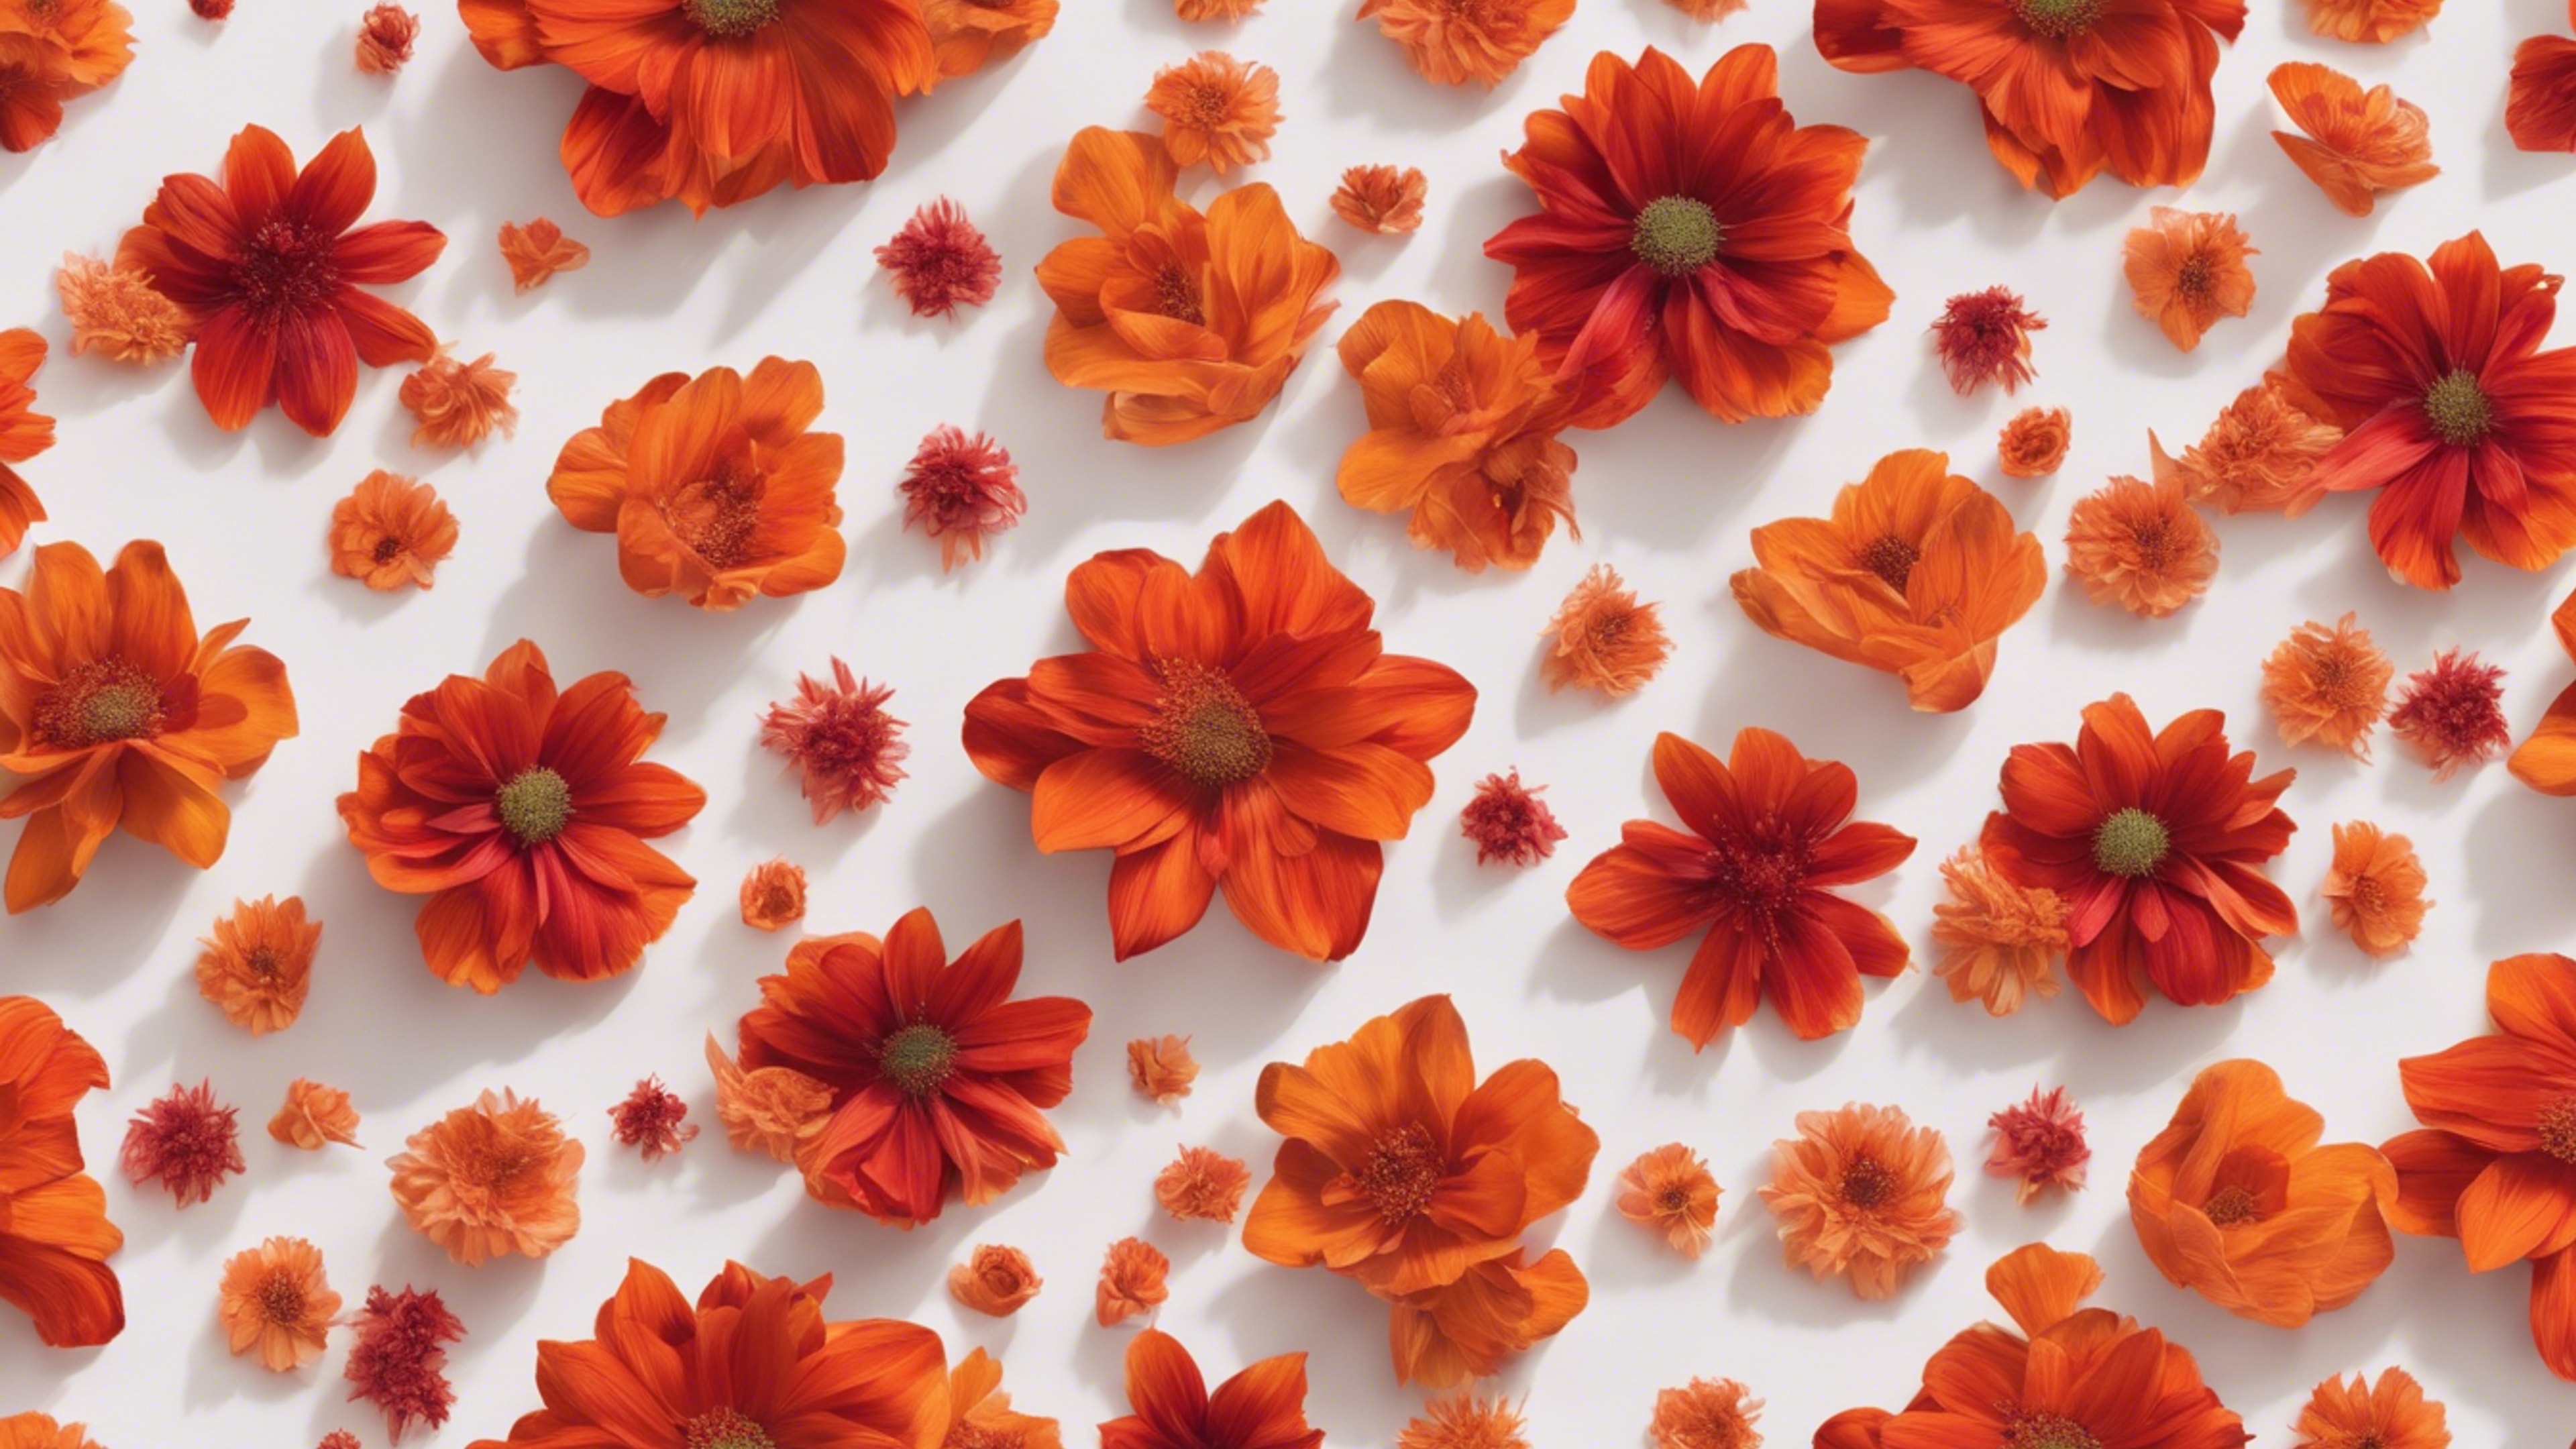 Vibrantly swirling patterns of red and orange flowers that consist of delicate petals and leaves in a seamless layout. Hintergrund[1a3317c1e5234fee8b43]